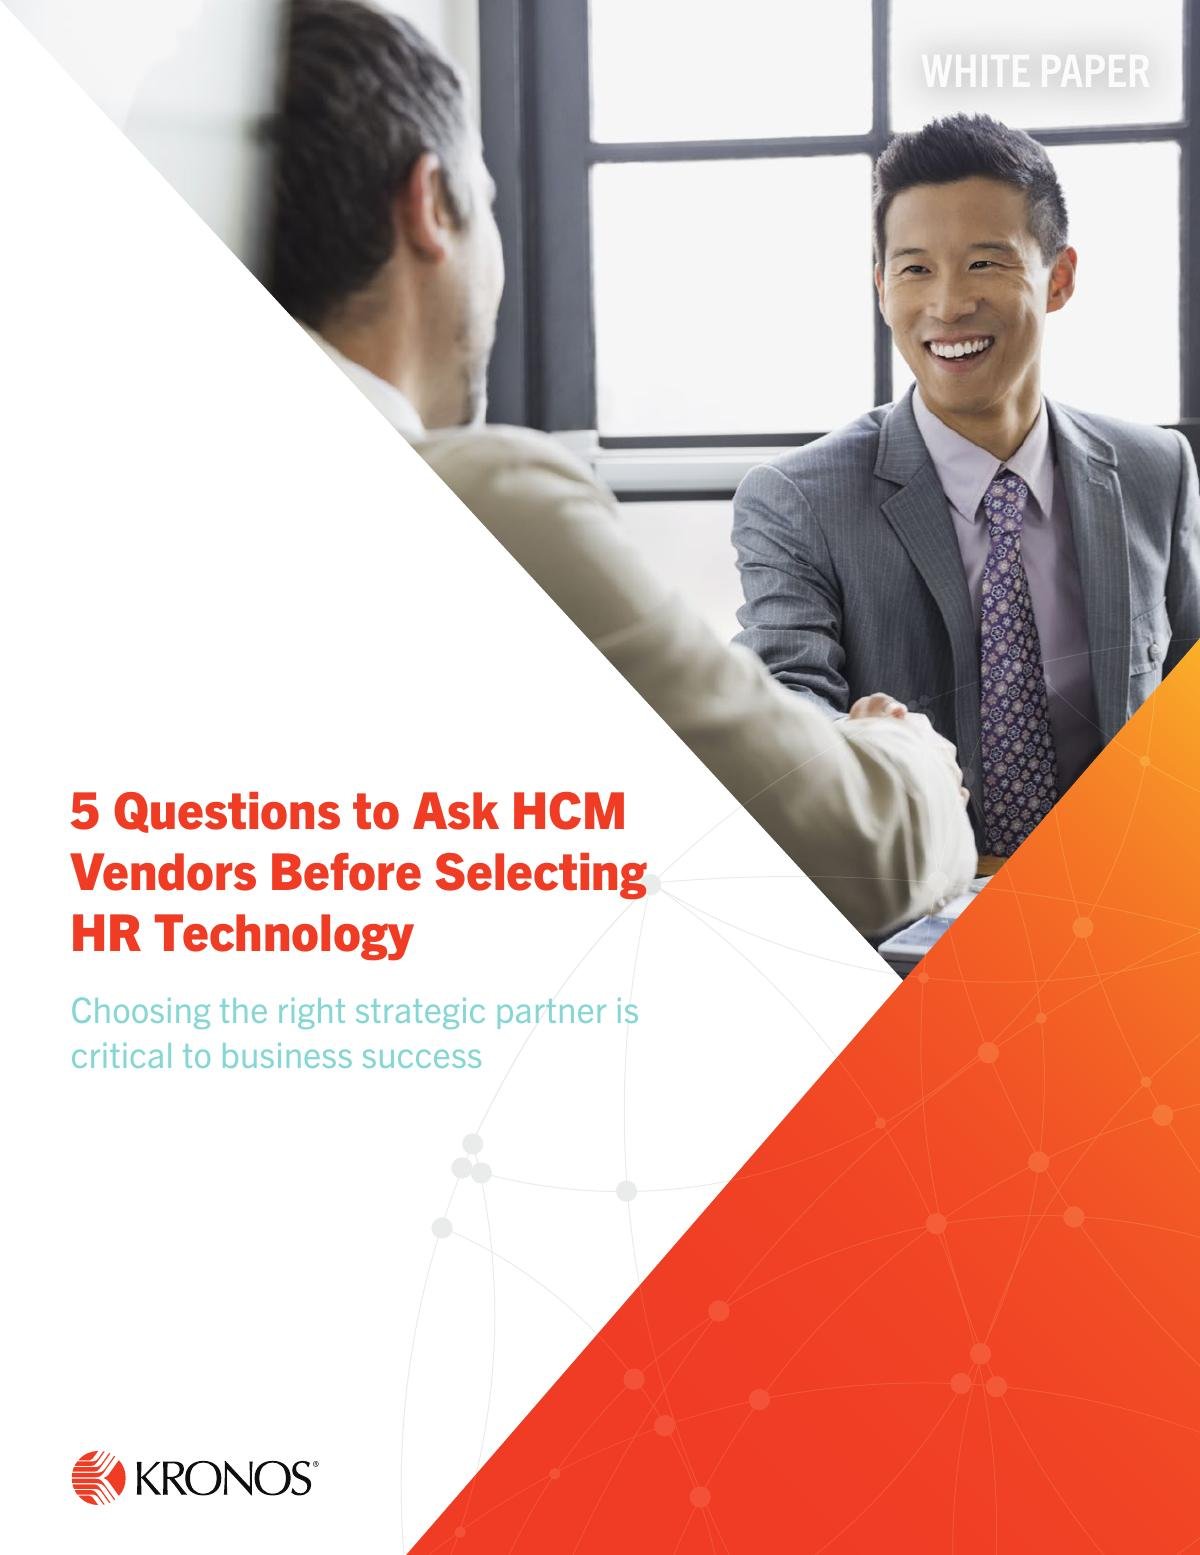 5 Questions to Ask HCM Vendors Before Selecting HR Technology